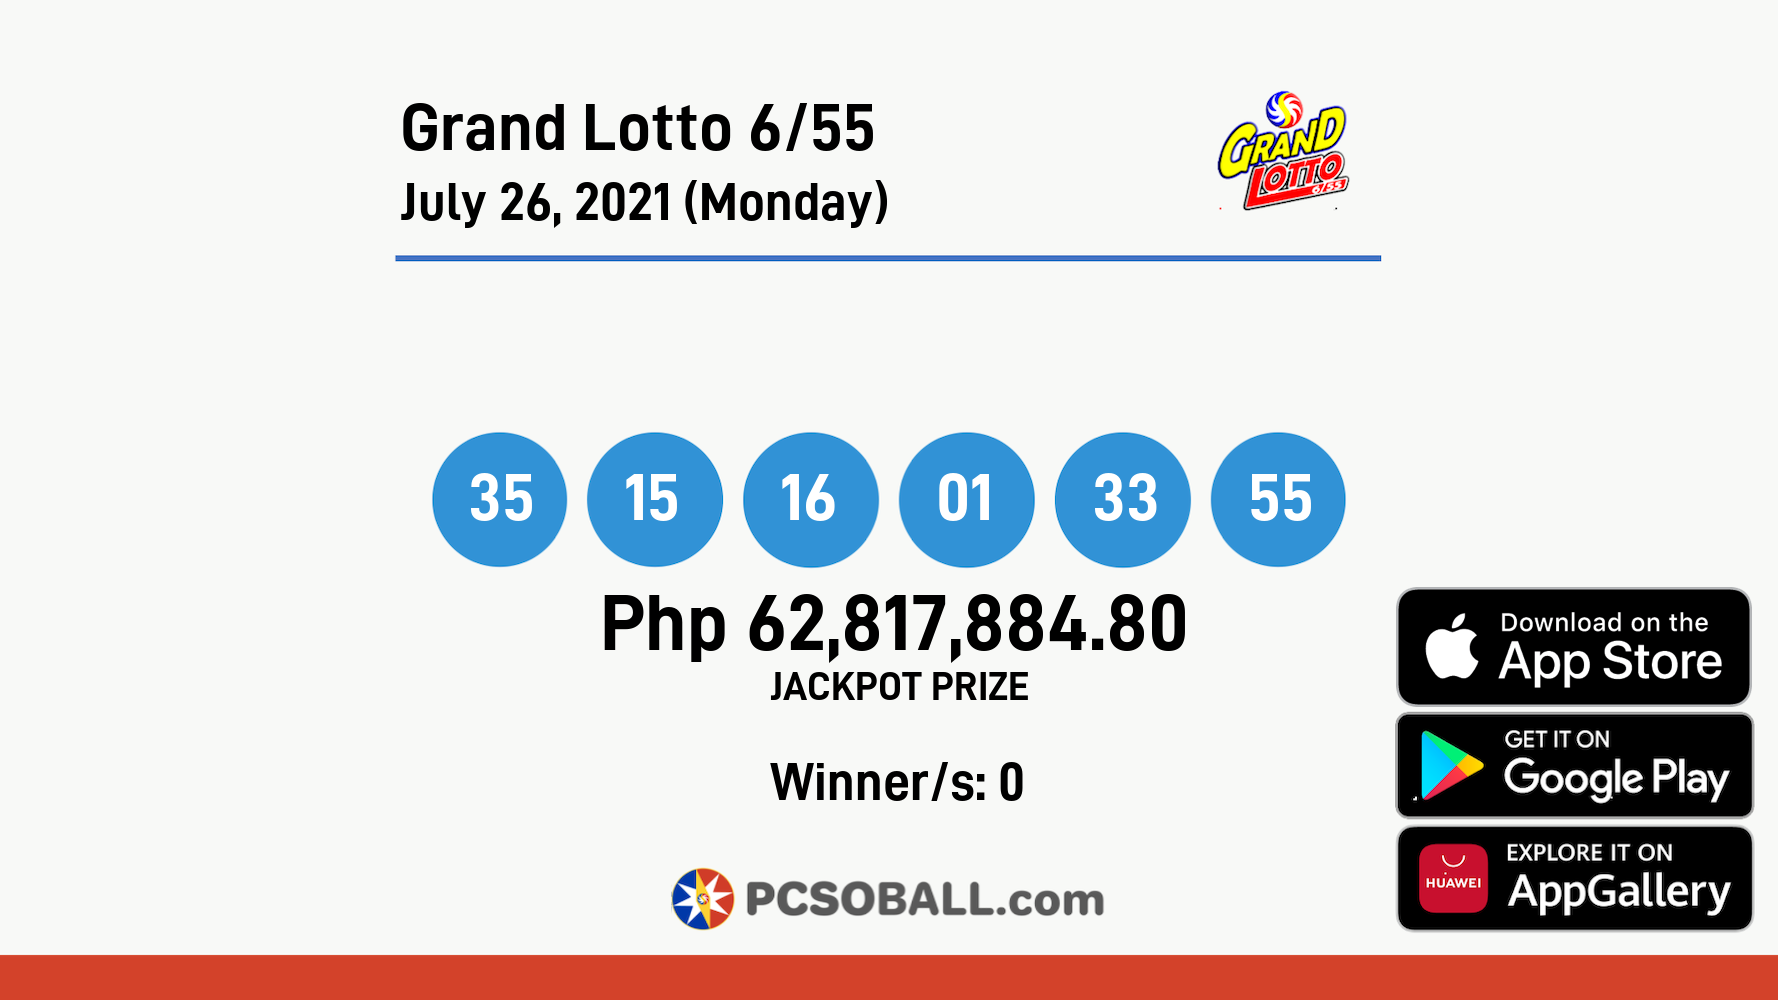 Grand Lotto 6/55 July 26, 2021 (Monday) Result